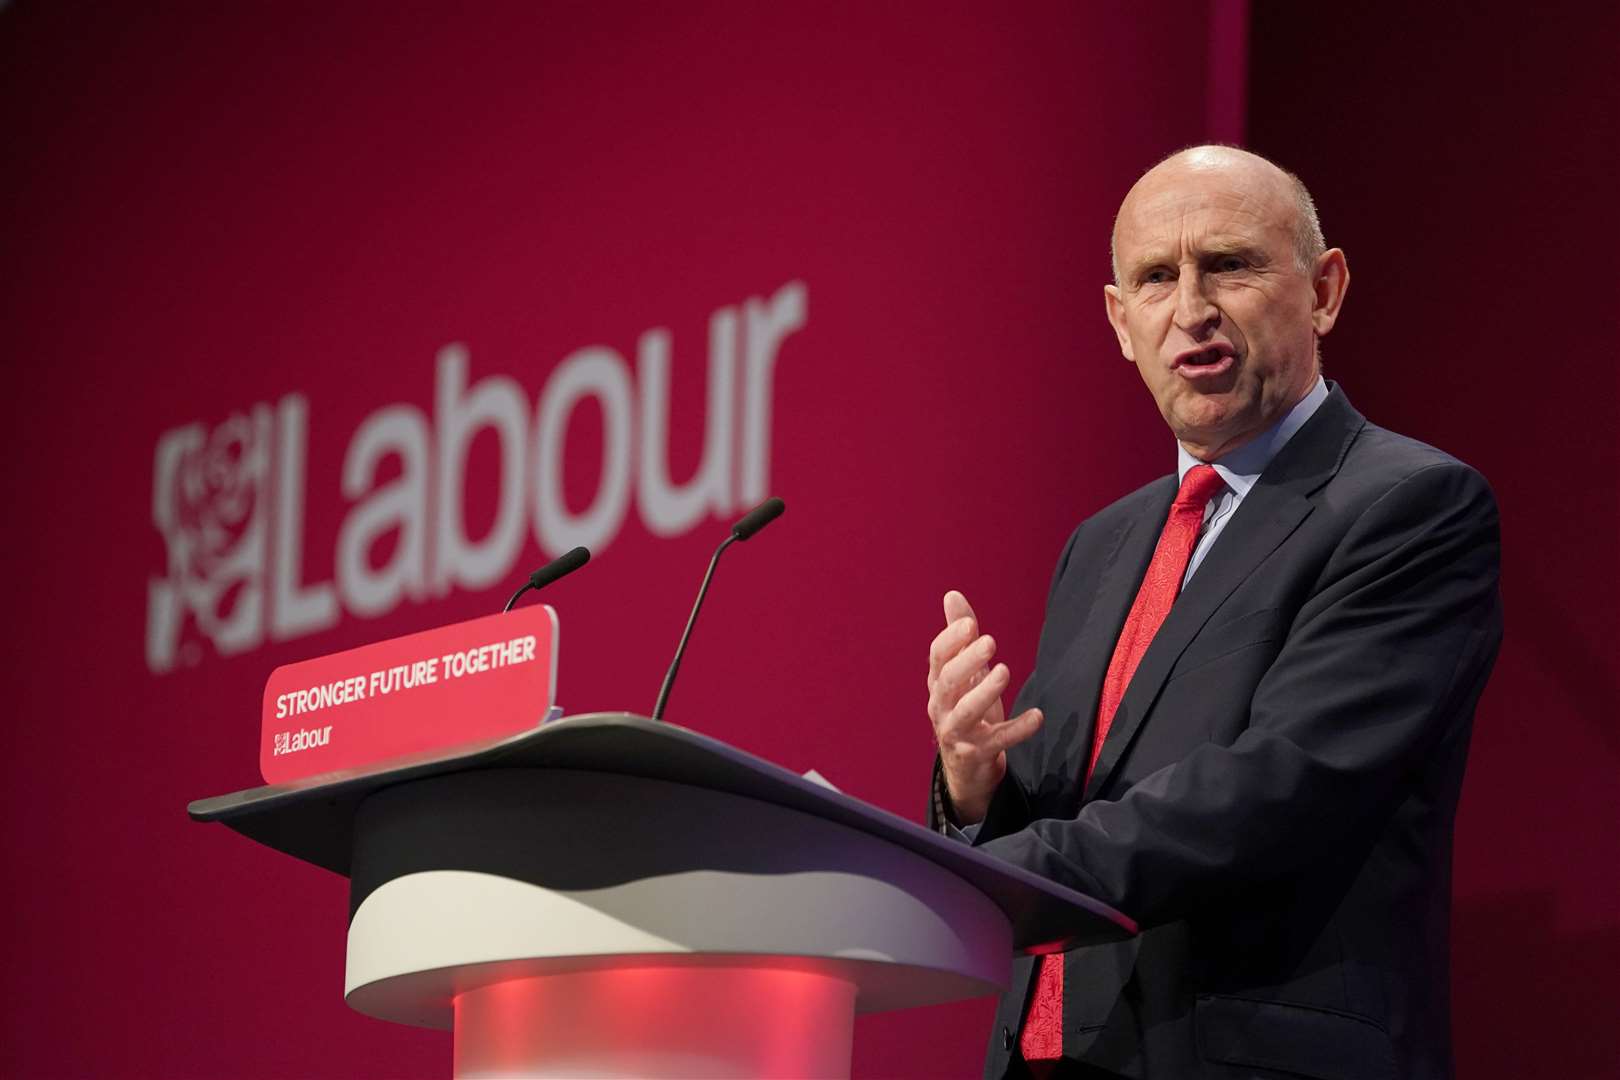 Shadow defence secretary John Healey said the move was an admission of failure (Gareth Fuller/PA Wire)